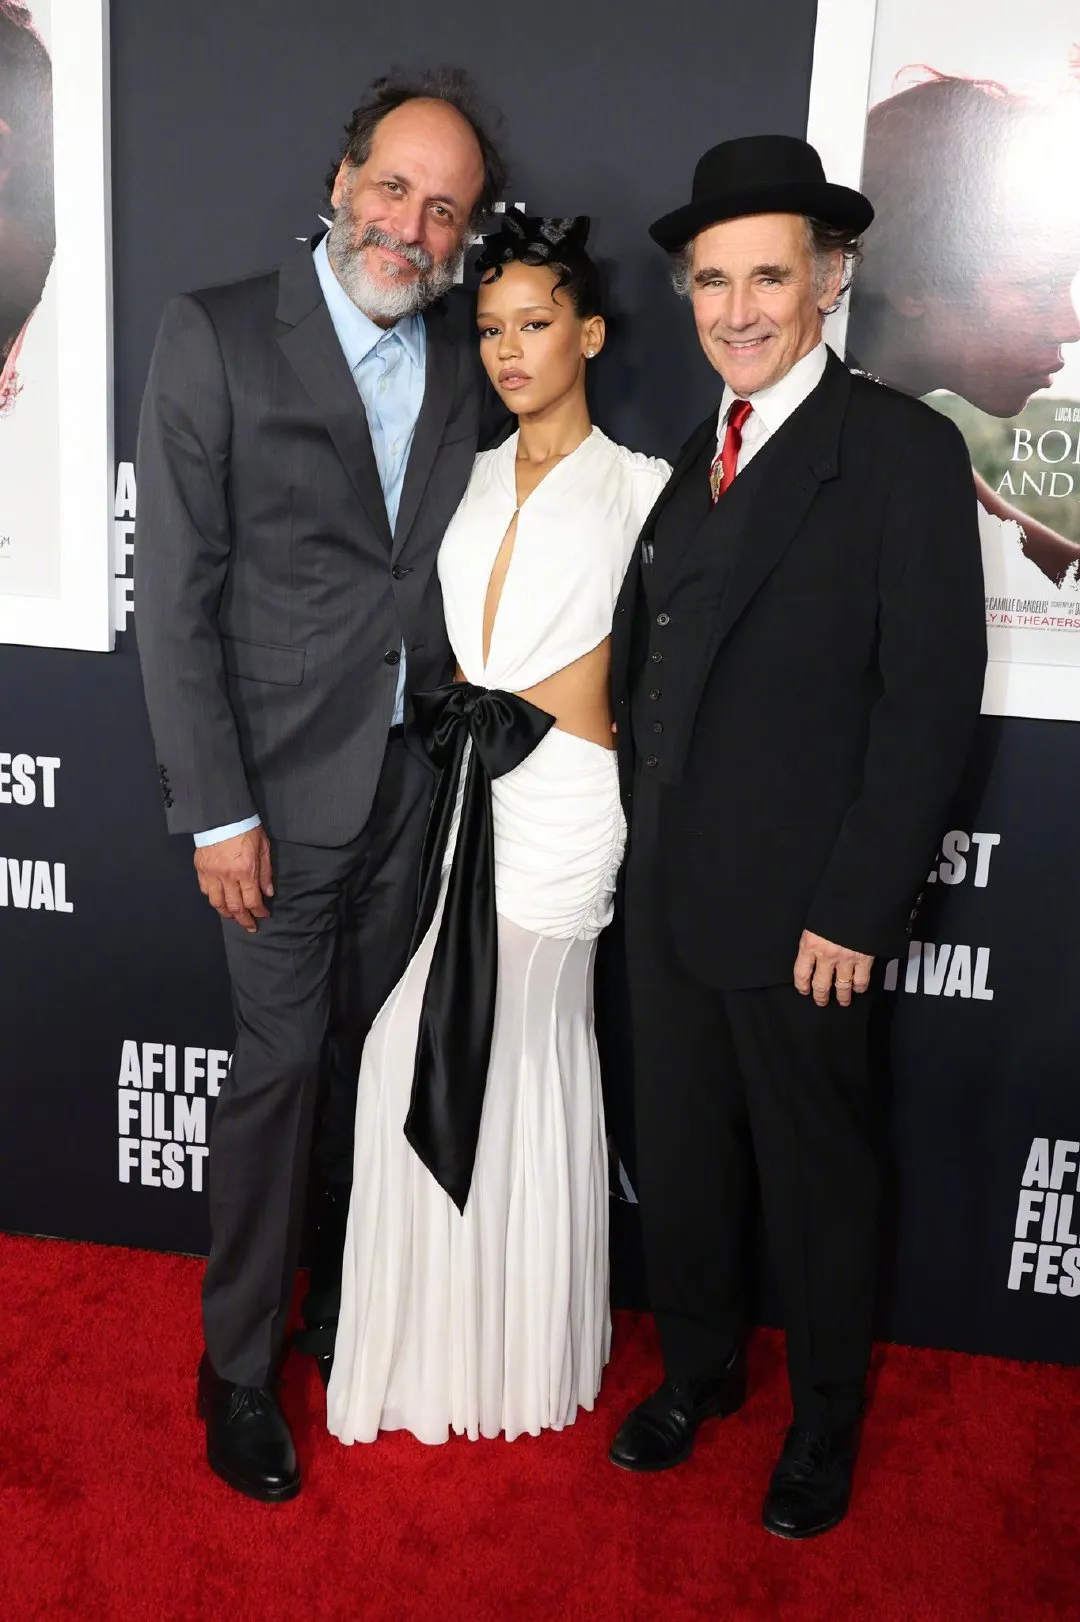 Taylor Russell attends the premiere event of 'Bones & All‎' at the American Film Institute | FMV6